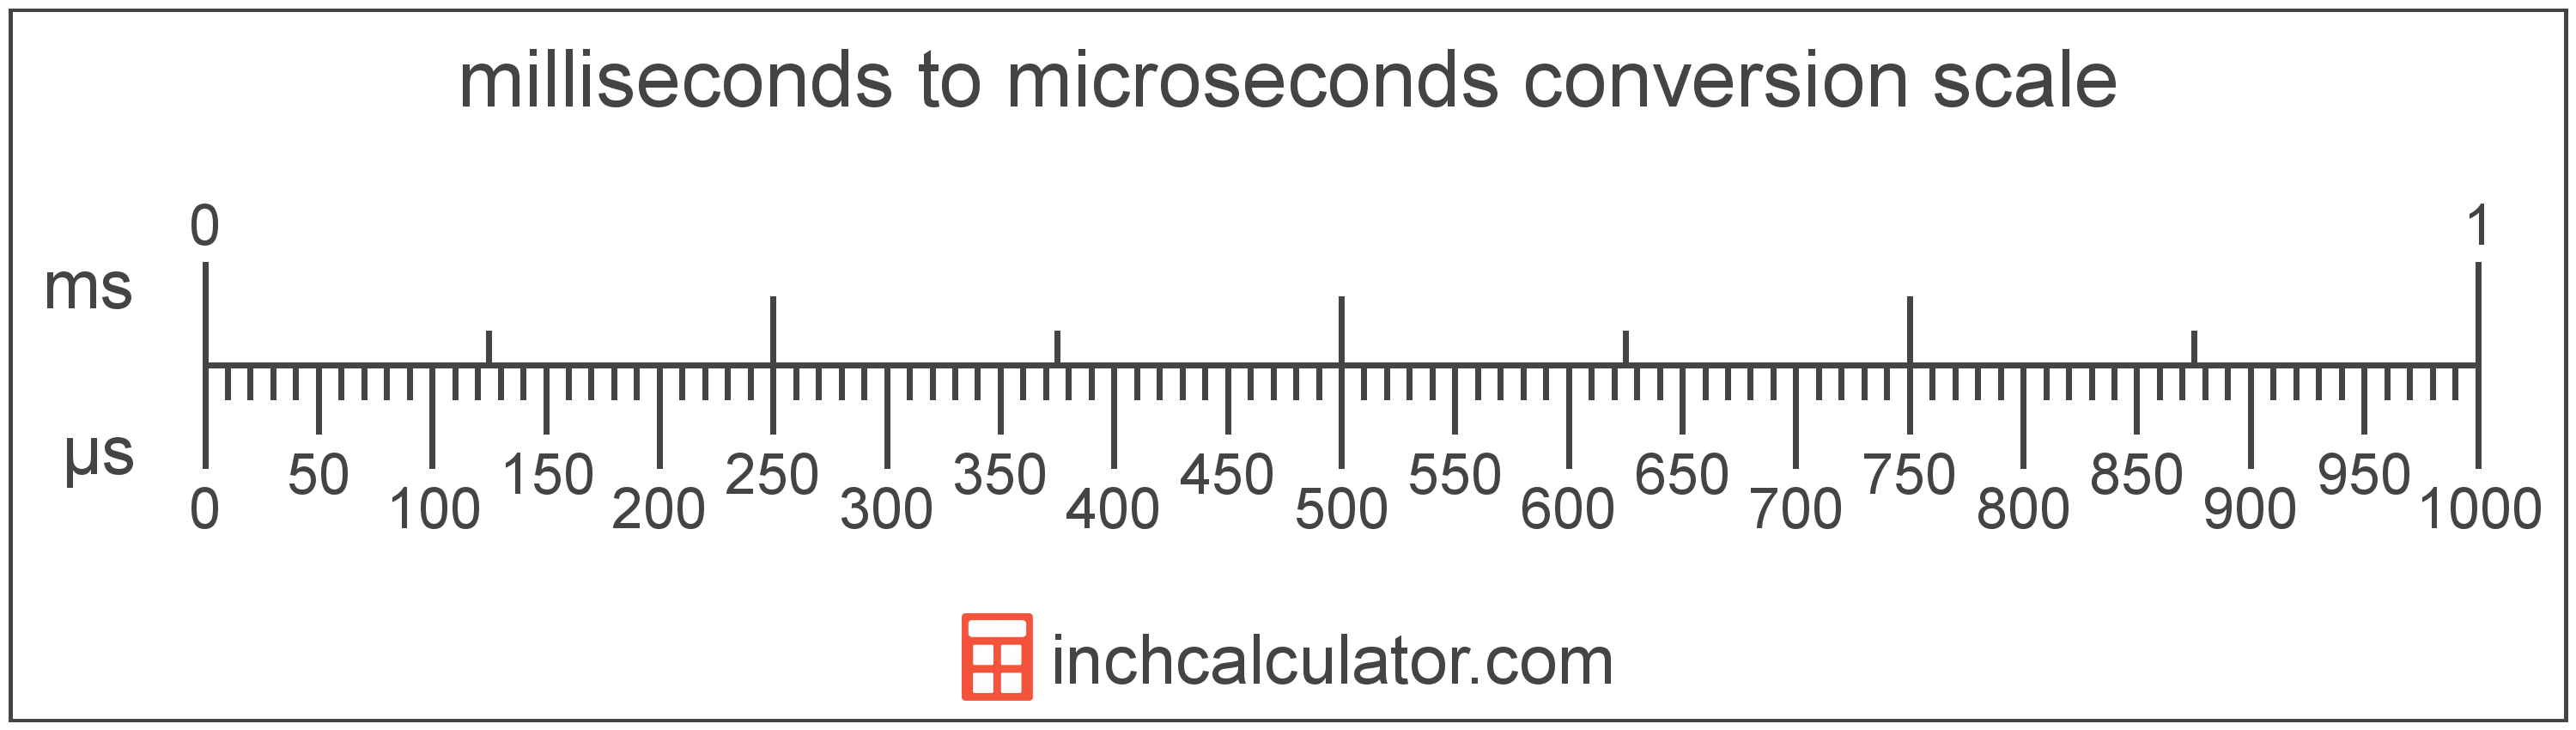 conversion scale showing milliseconds and equivalent microseconds time values